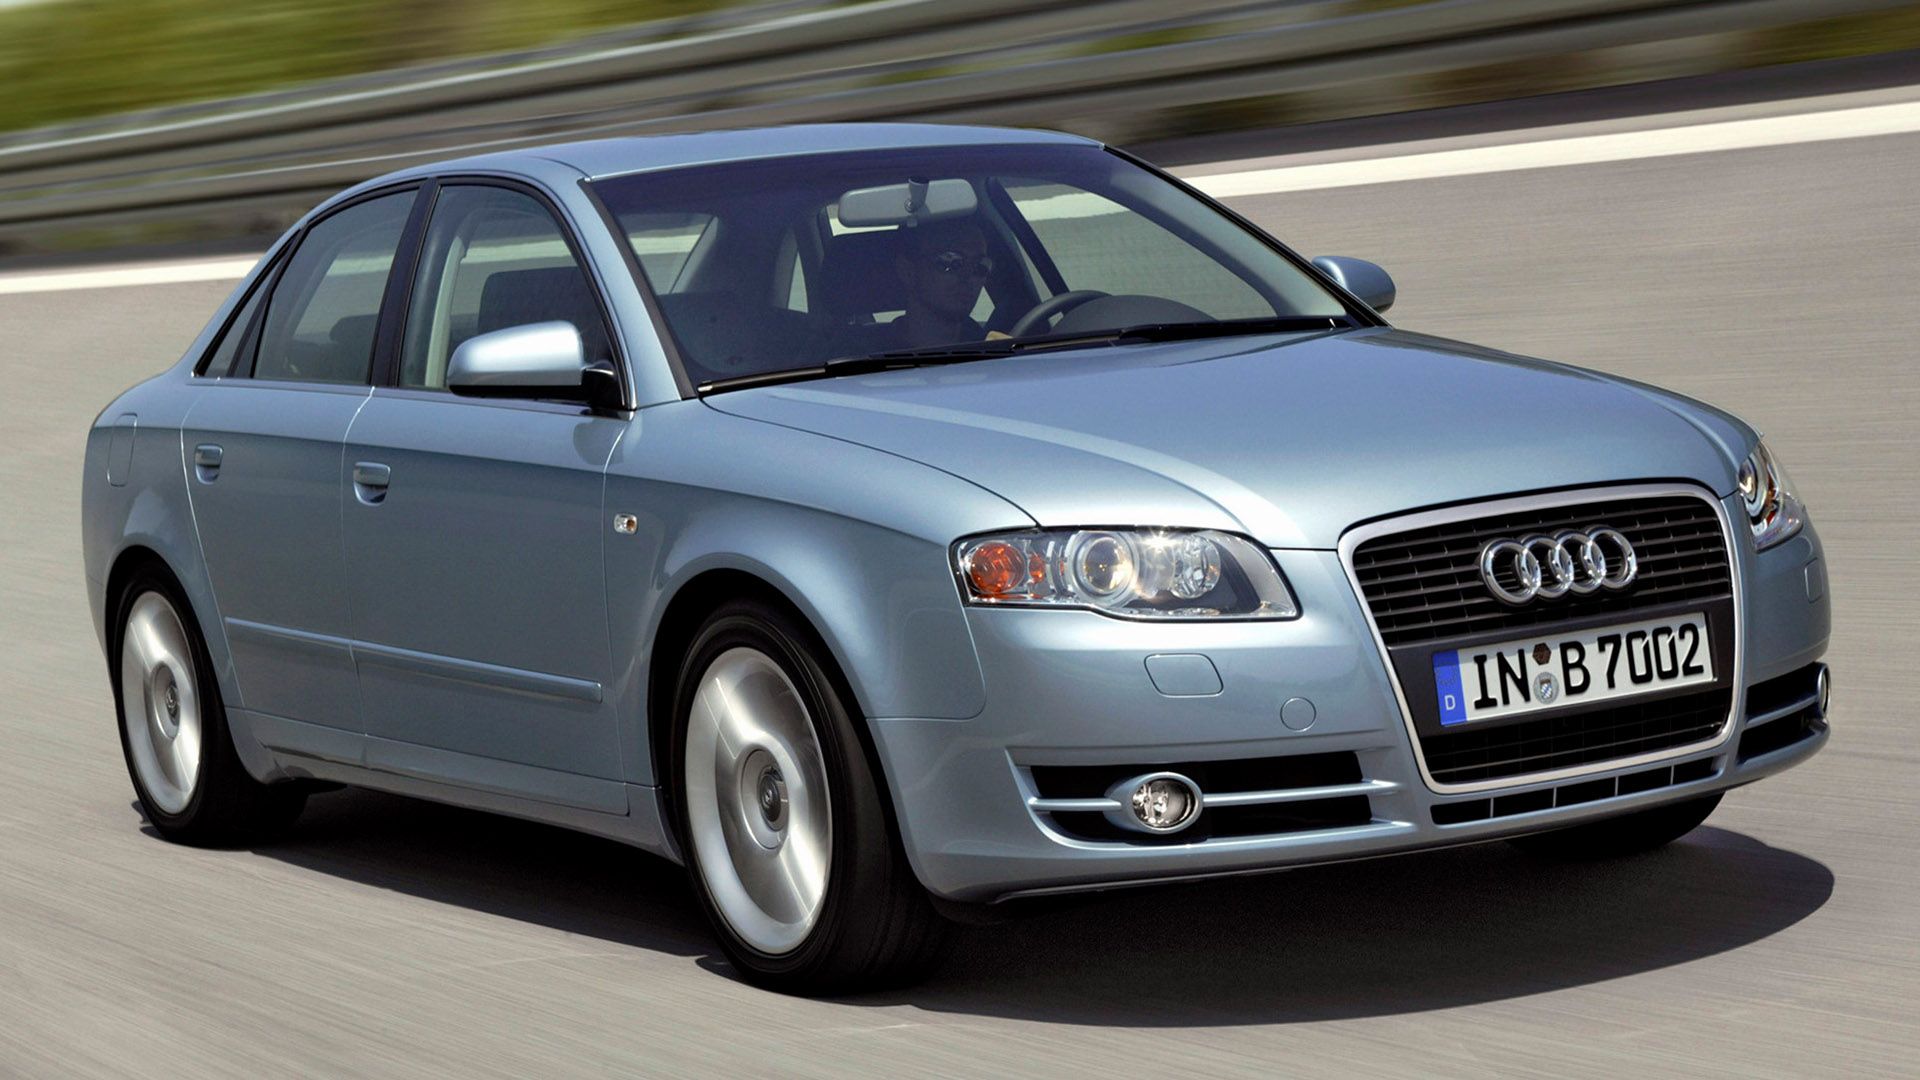 Silver-blue Audi A4 sedan driving on the motorway, crash barriers on the side